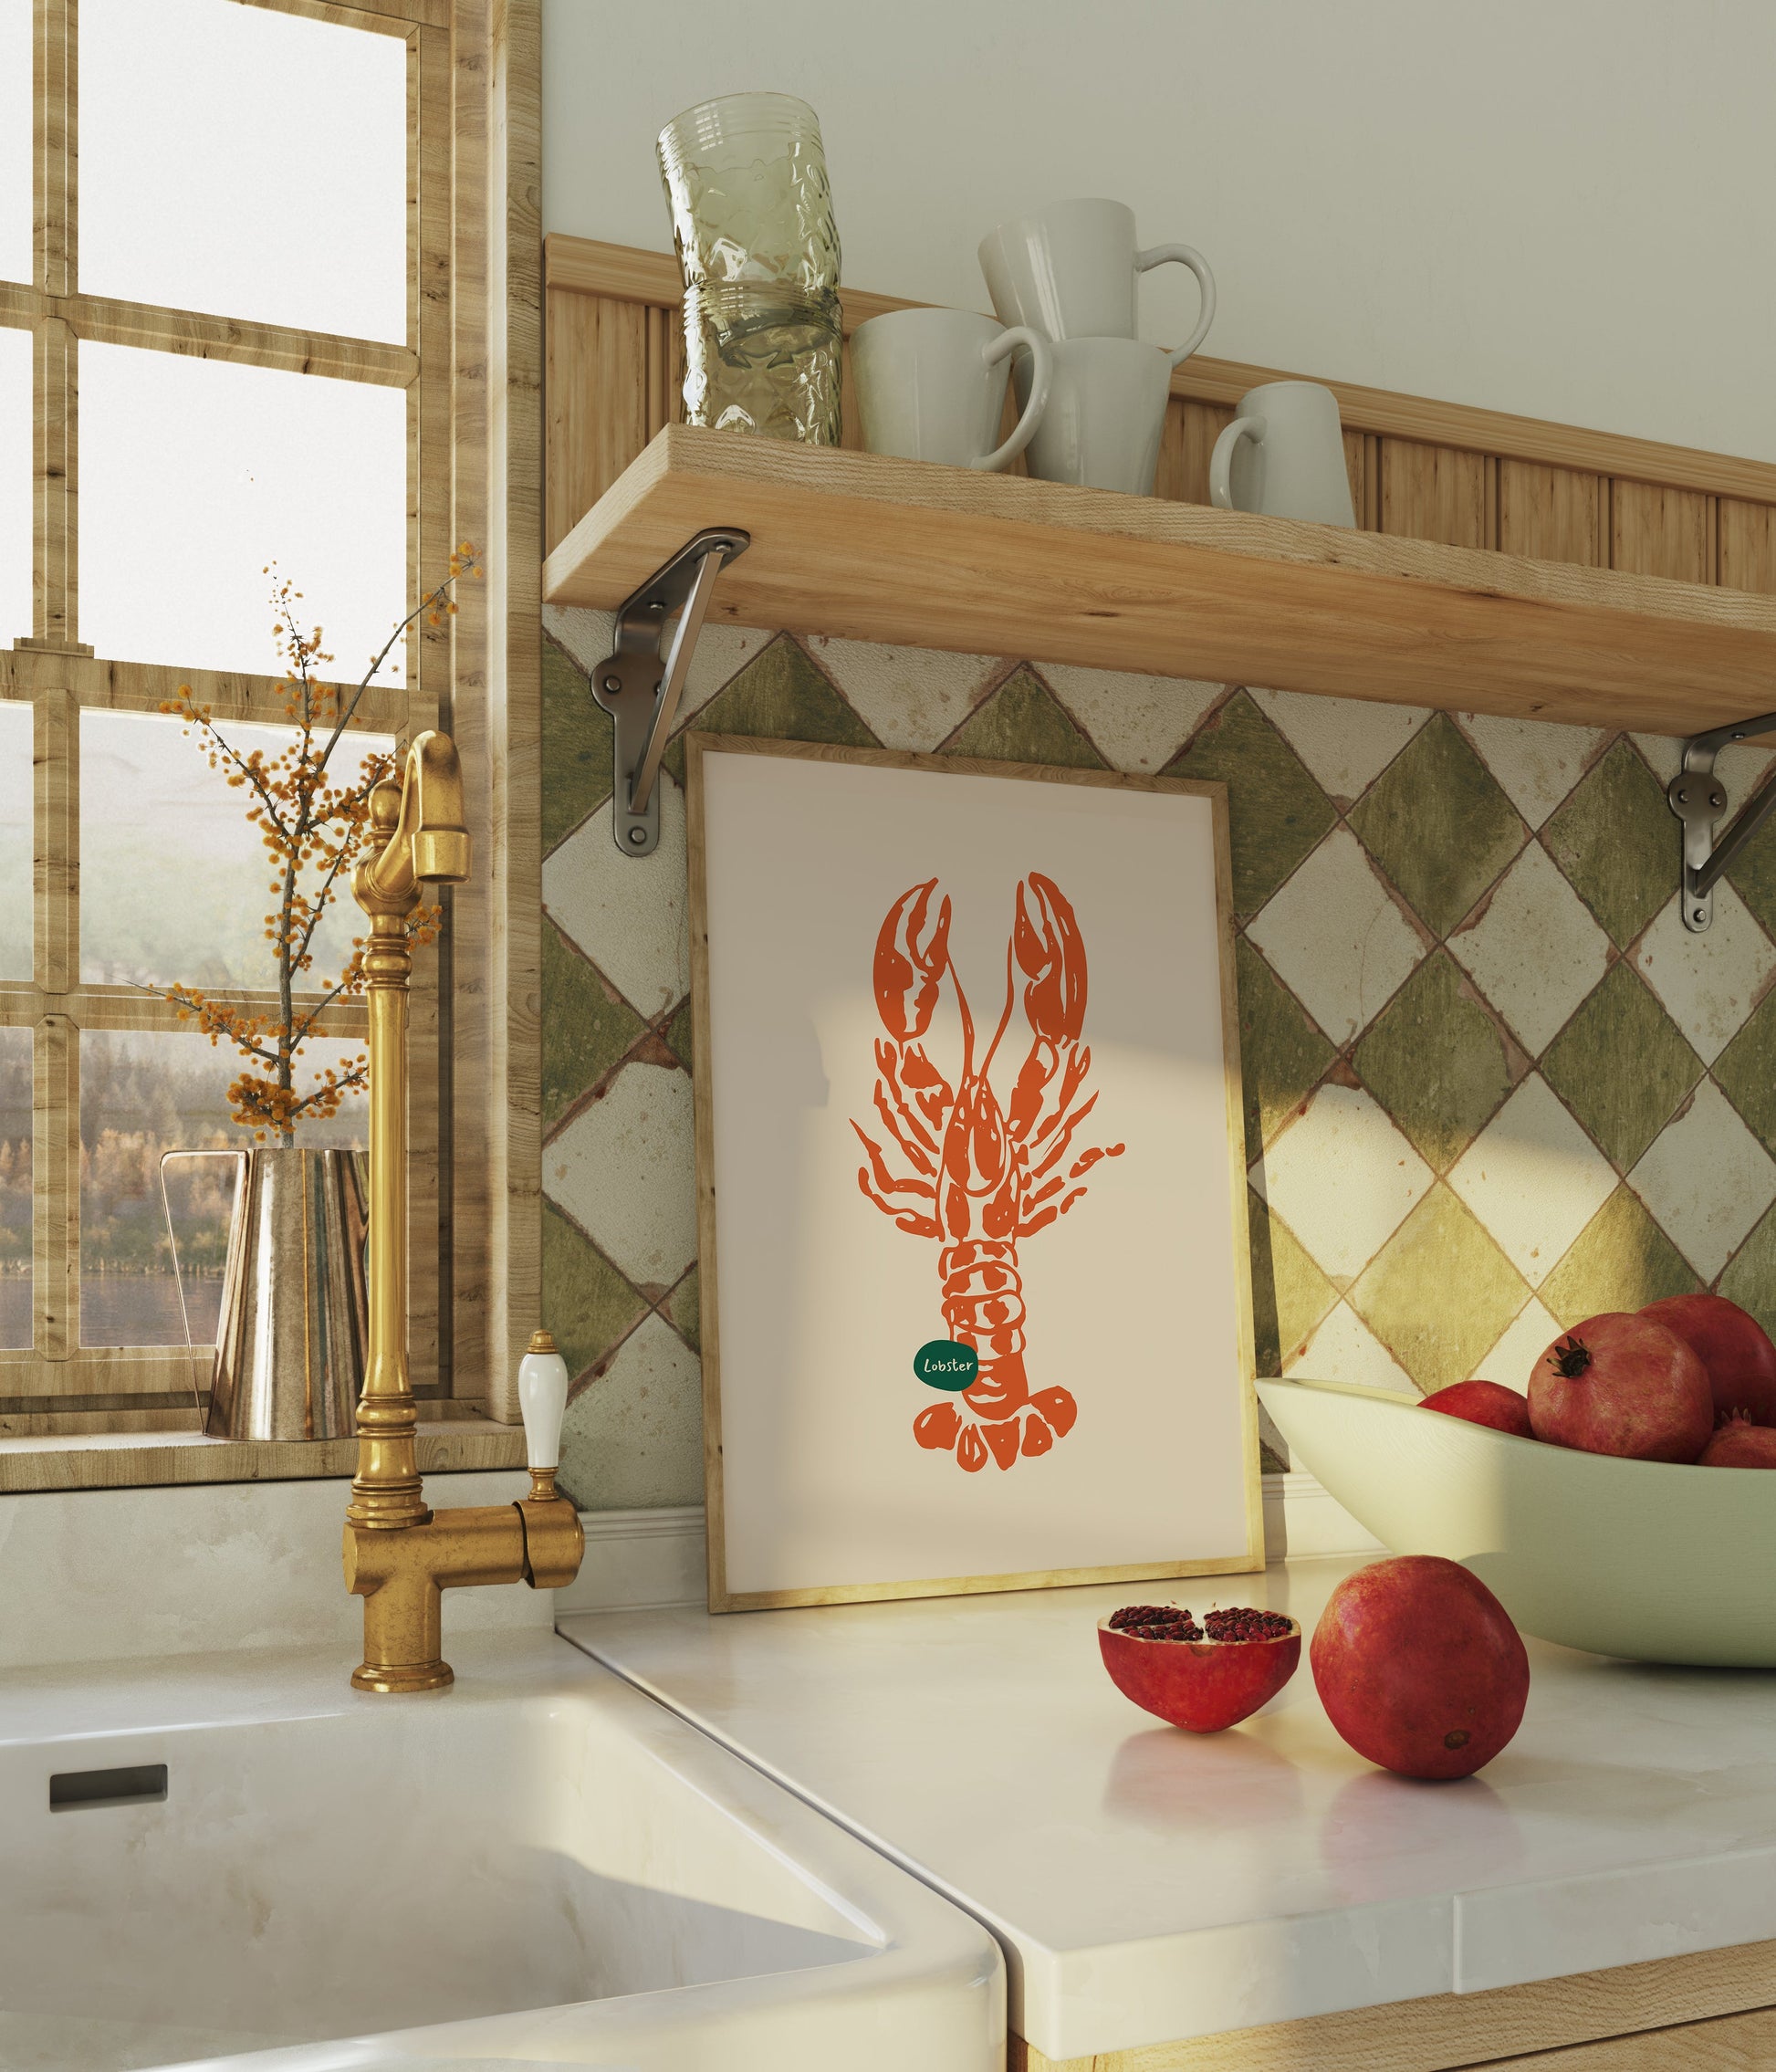 a picture of a lobster on a kitchen counter